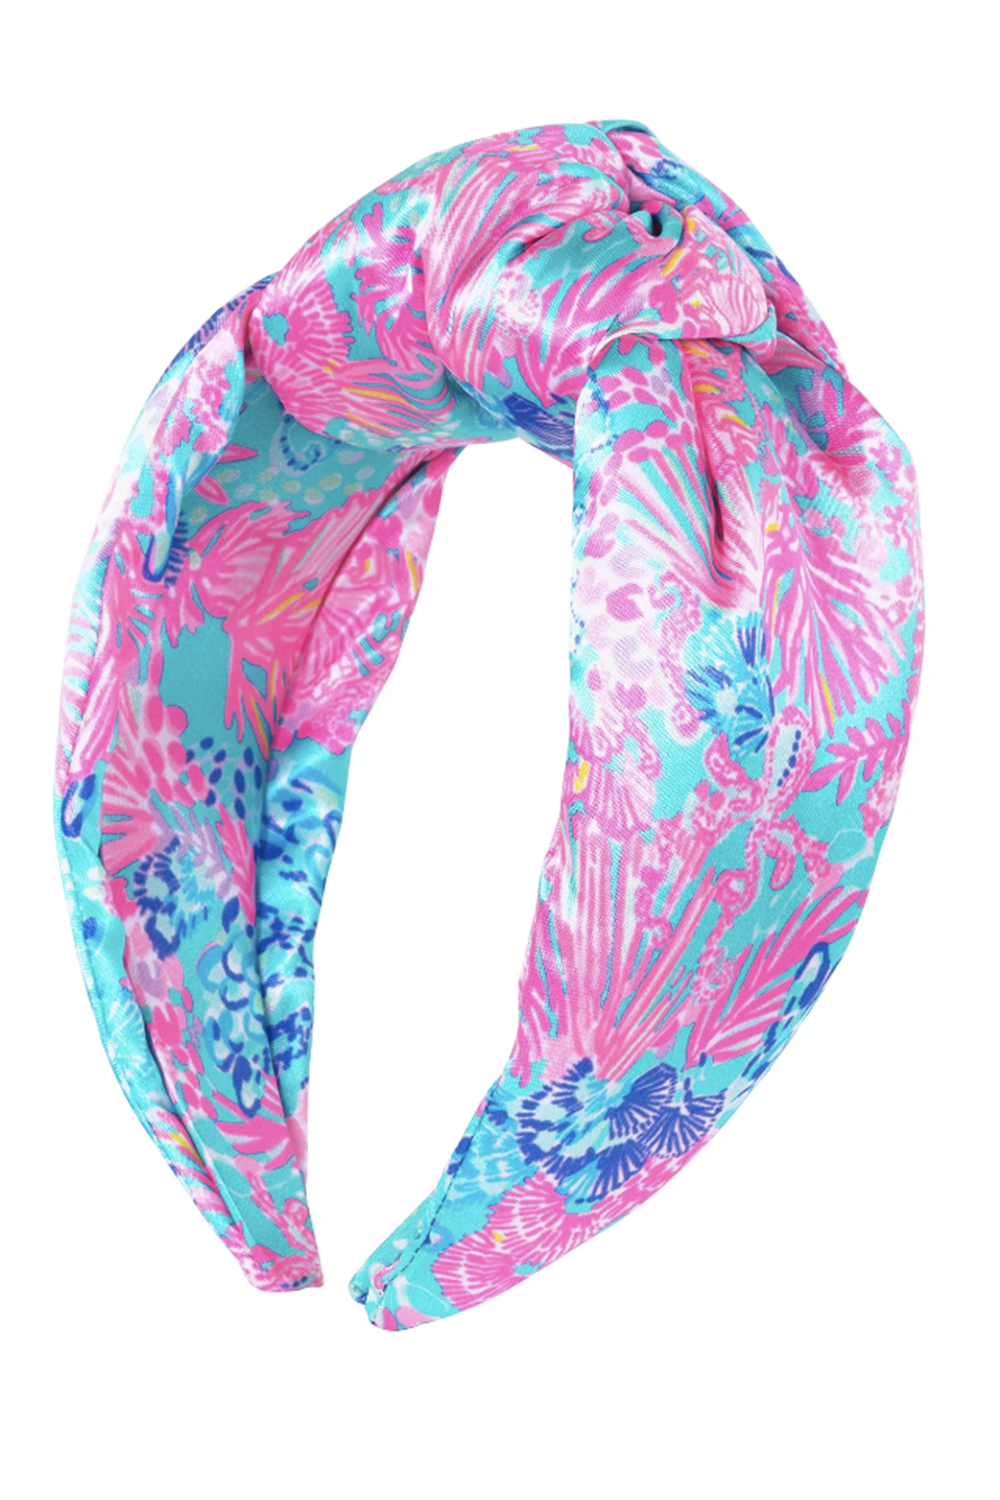 Lilly Pulitzer Wide Knotted Headband - Splendor in the Sand